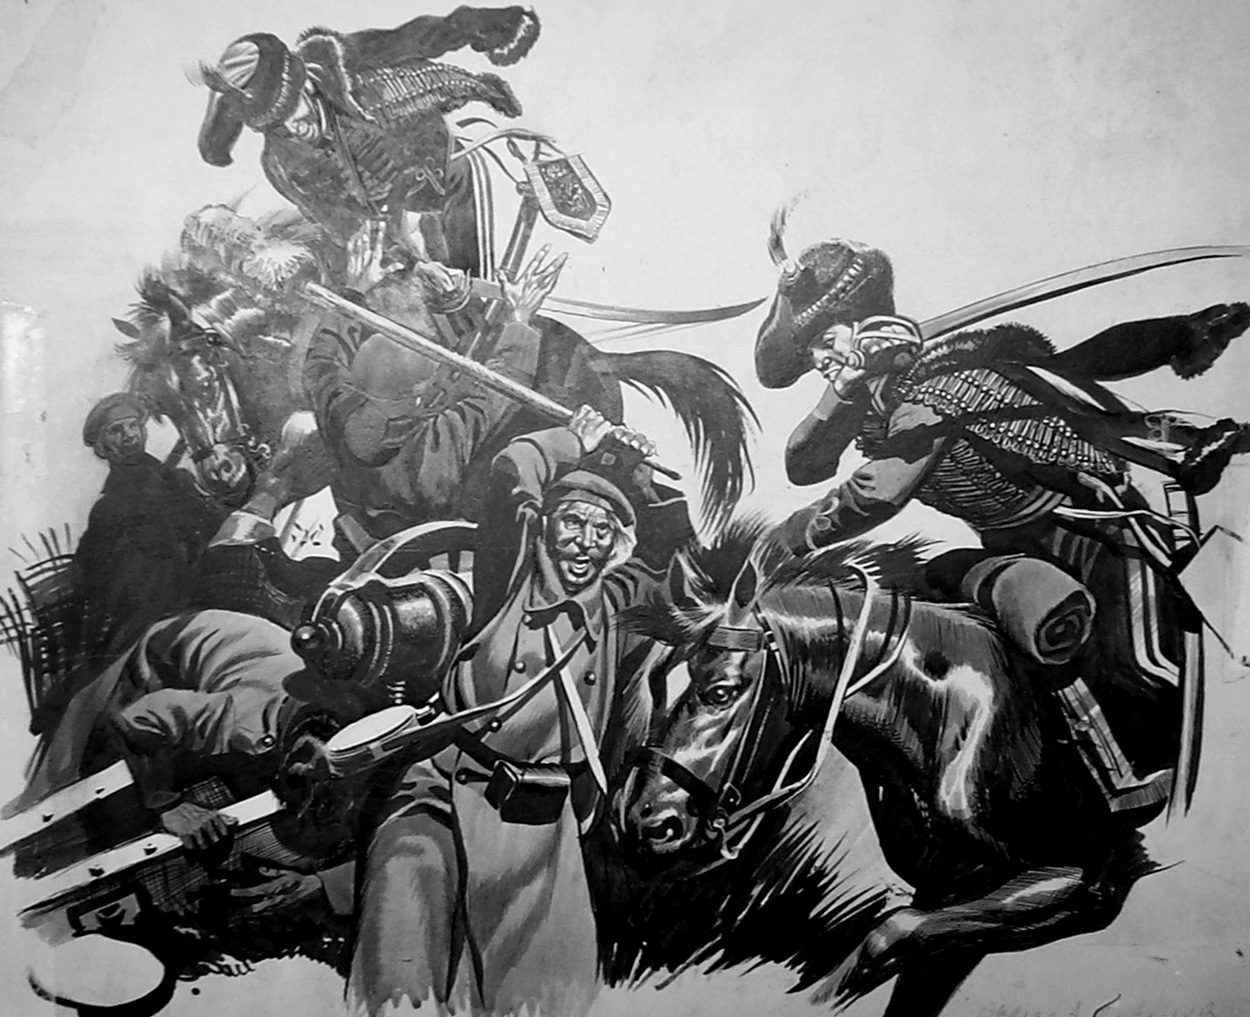 Charge of the Light Brigade (Original) art by British History (Ron Embleton) at The Illustration Art Gallery